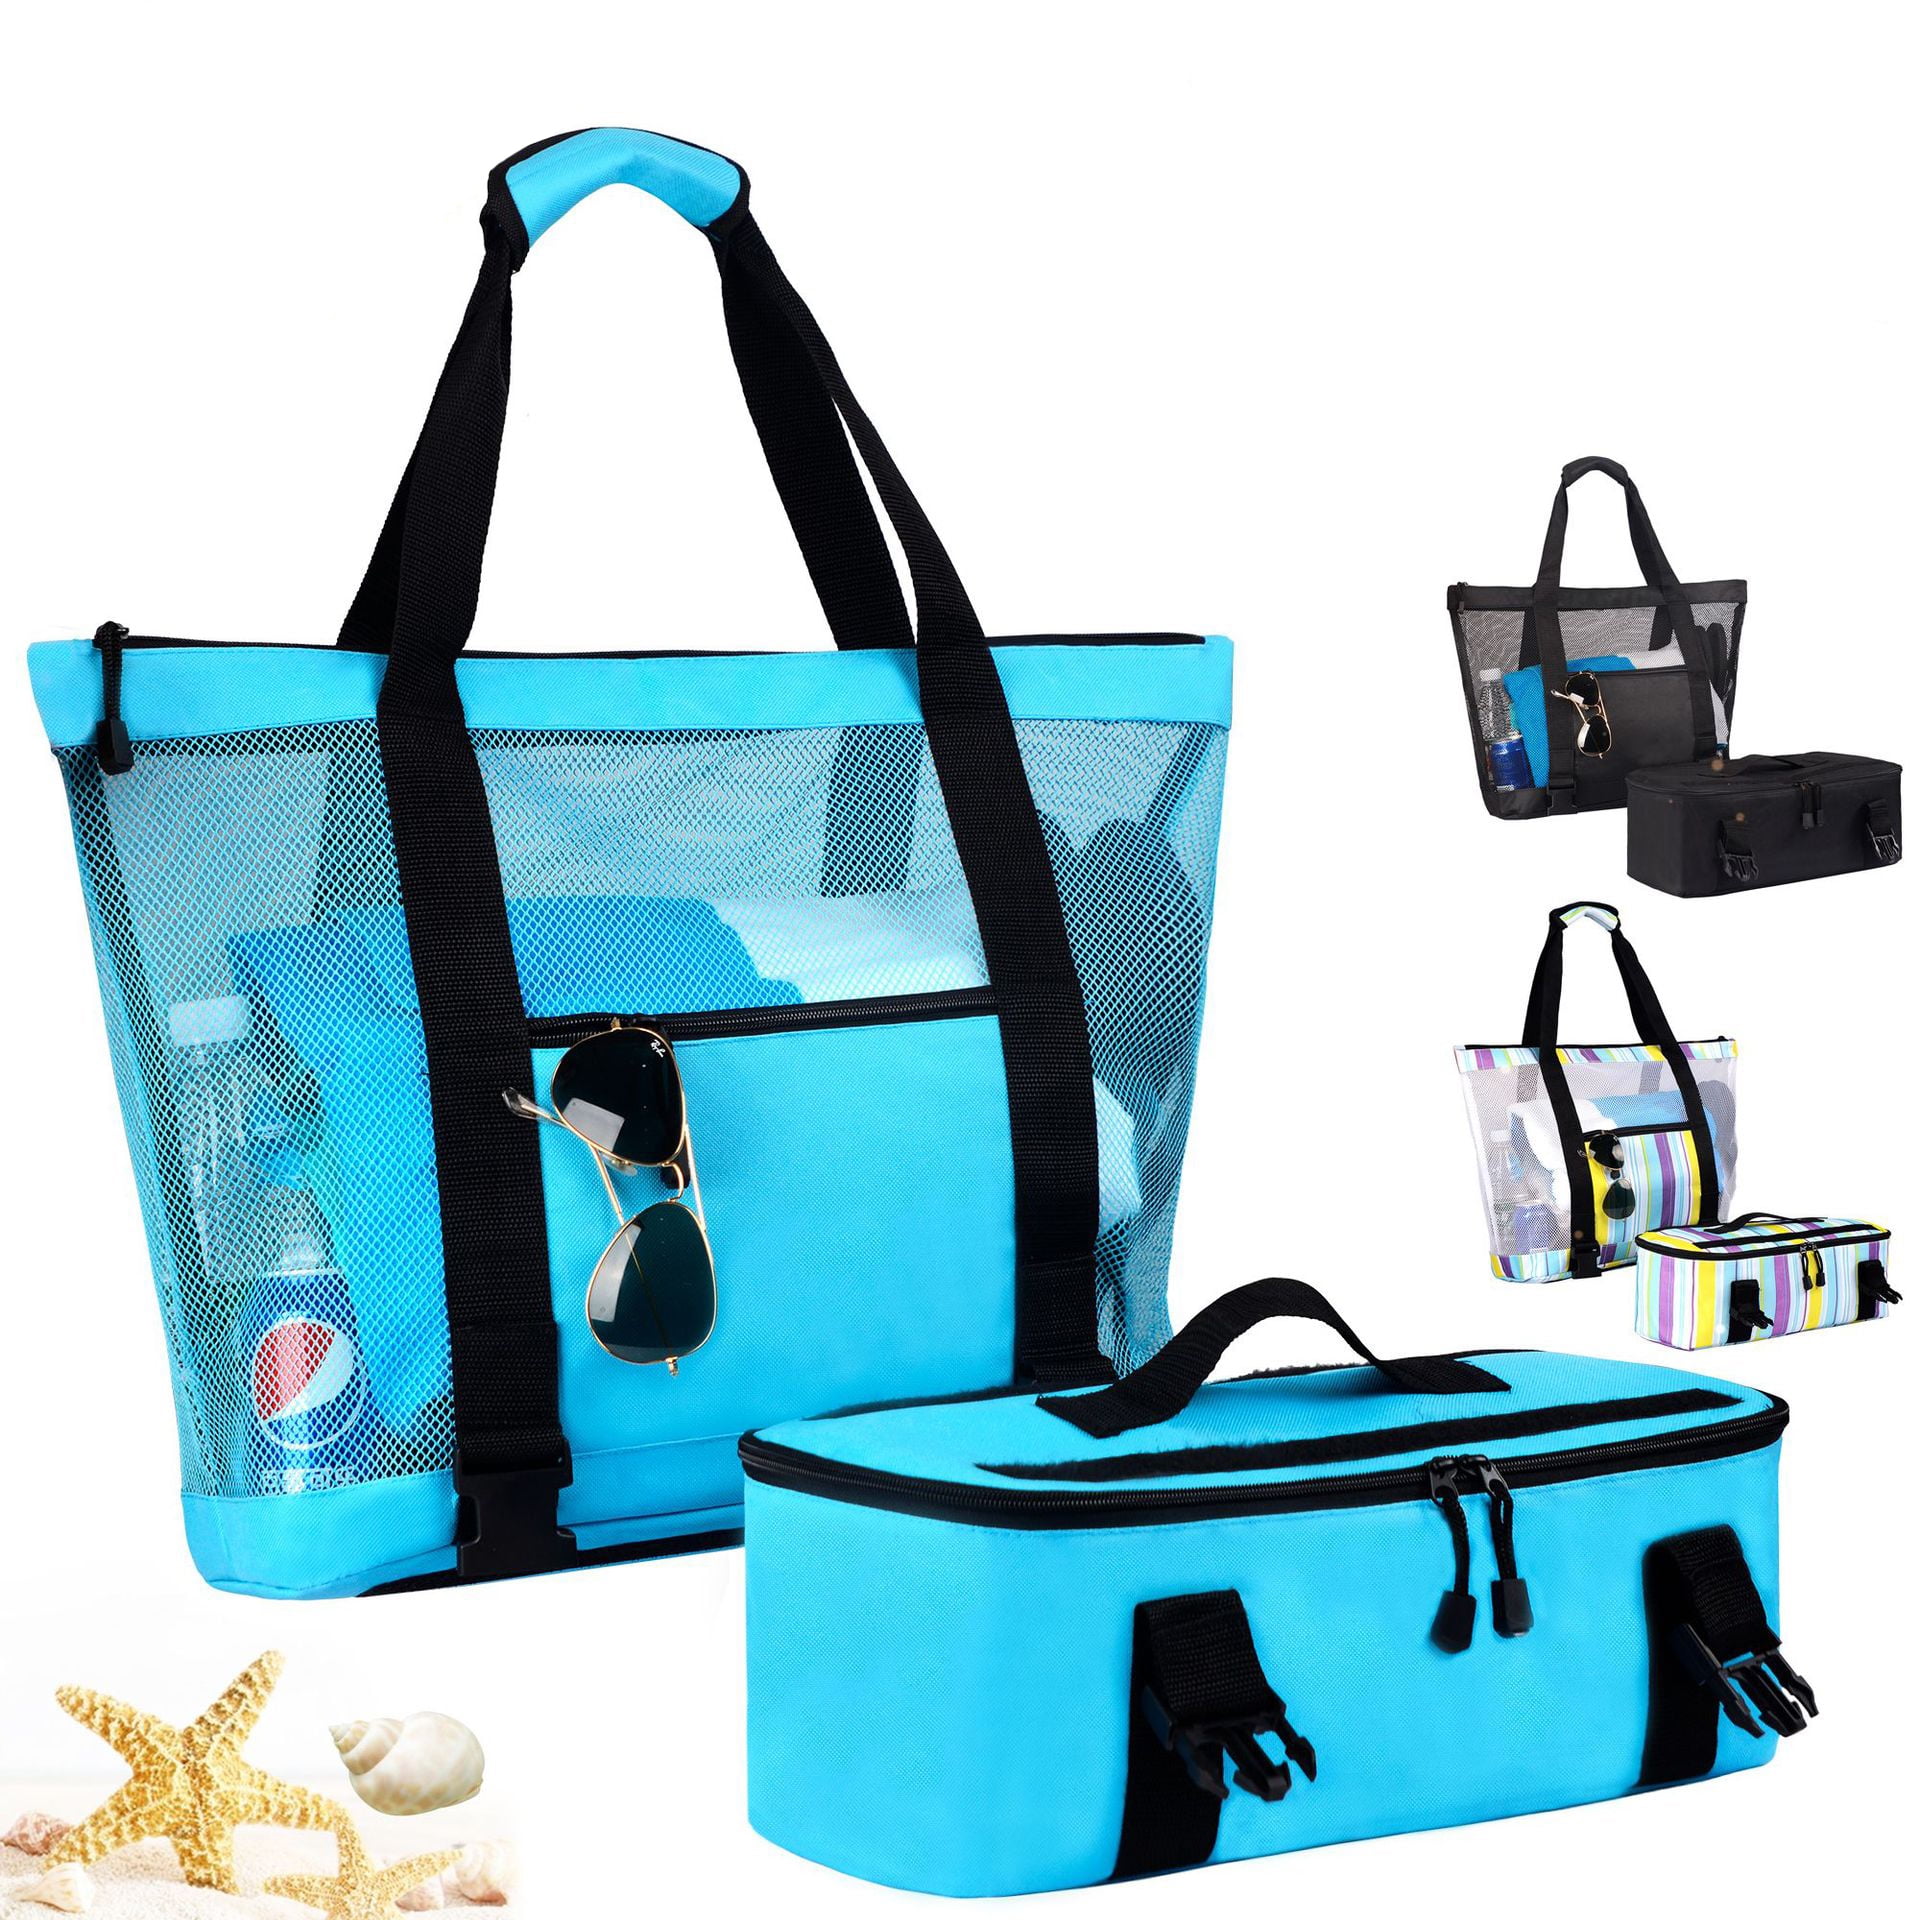 Mesh Beach Tote Bag with Cooler Insulated Detachable Pool Bags for ...